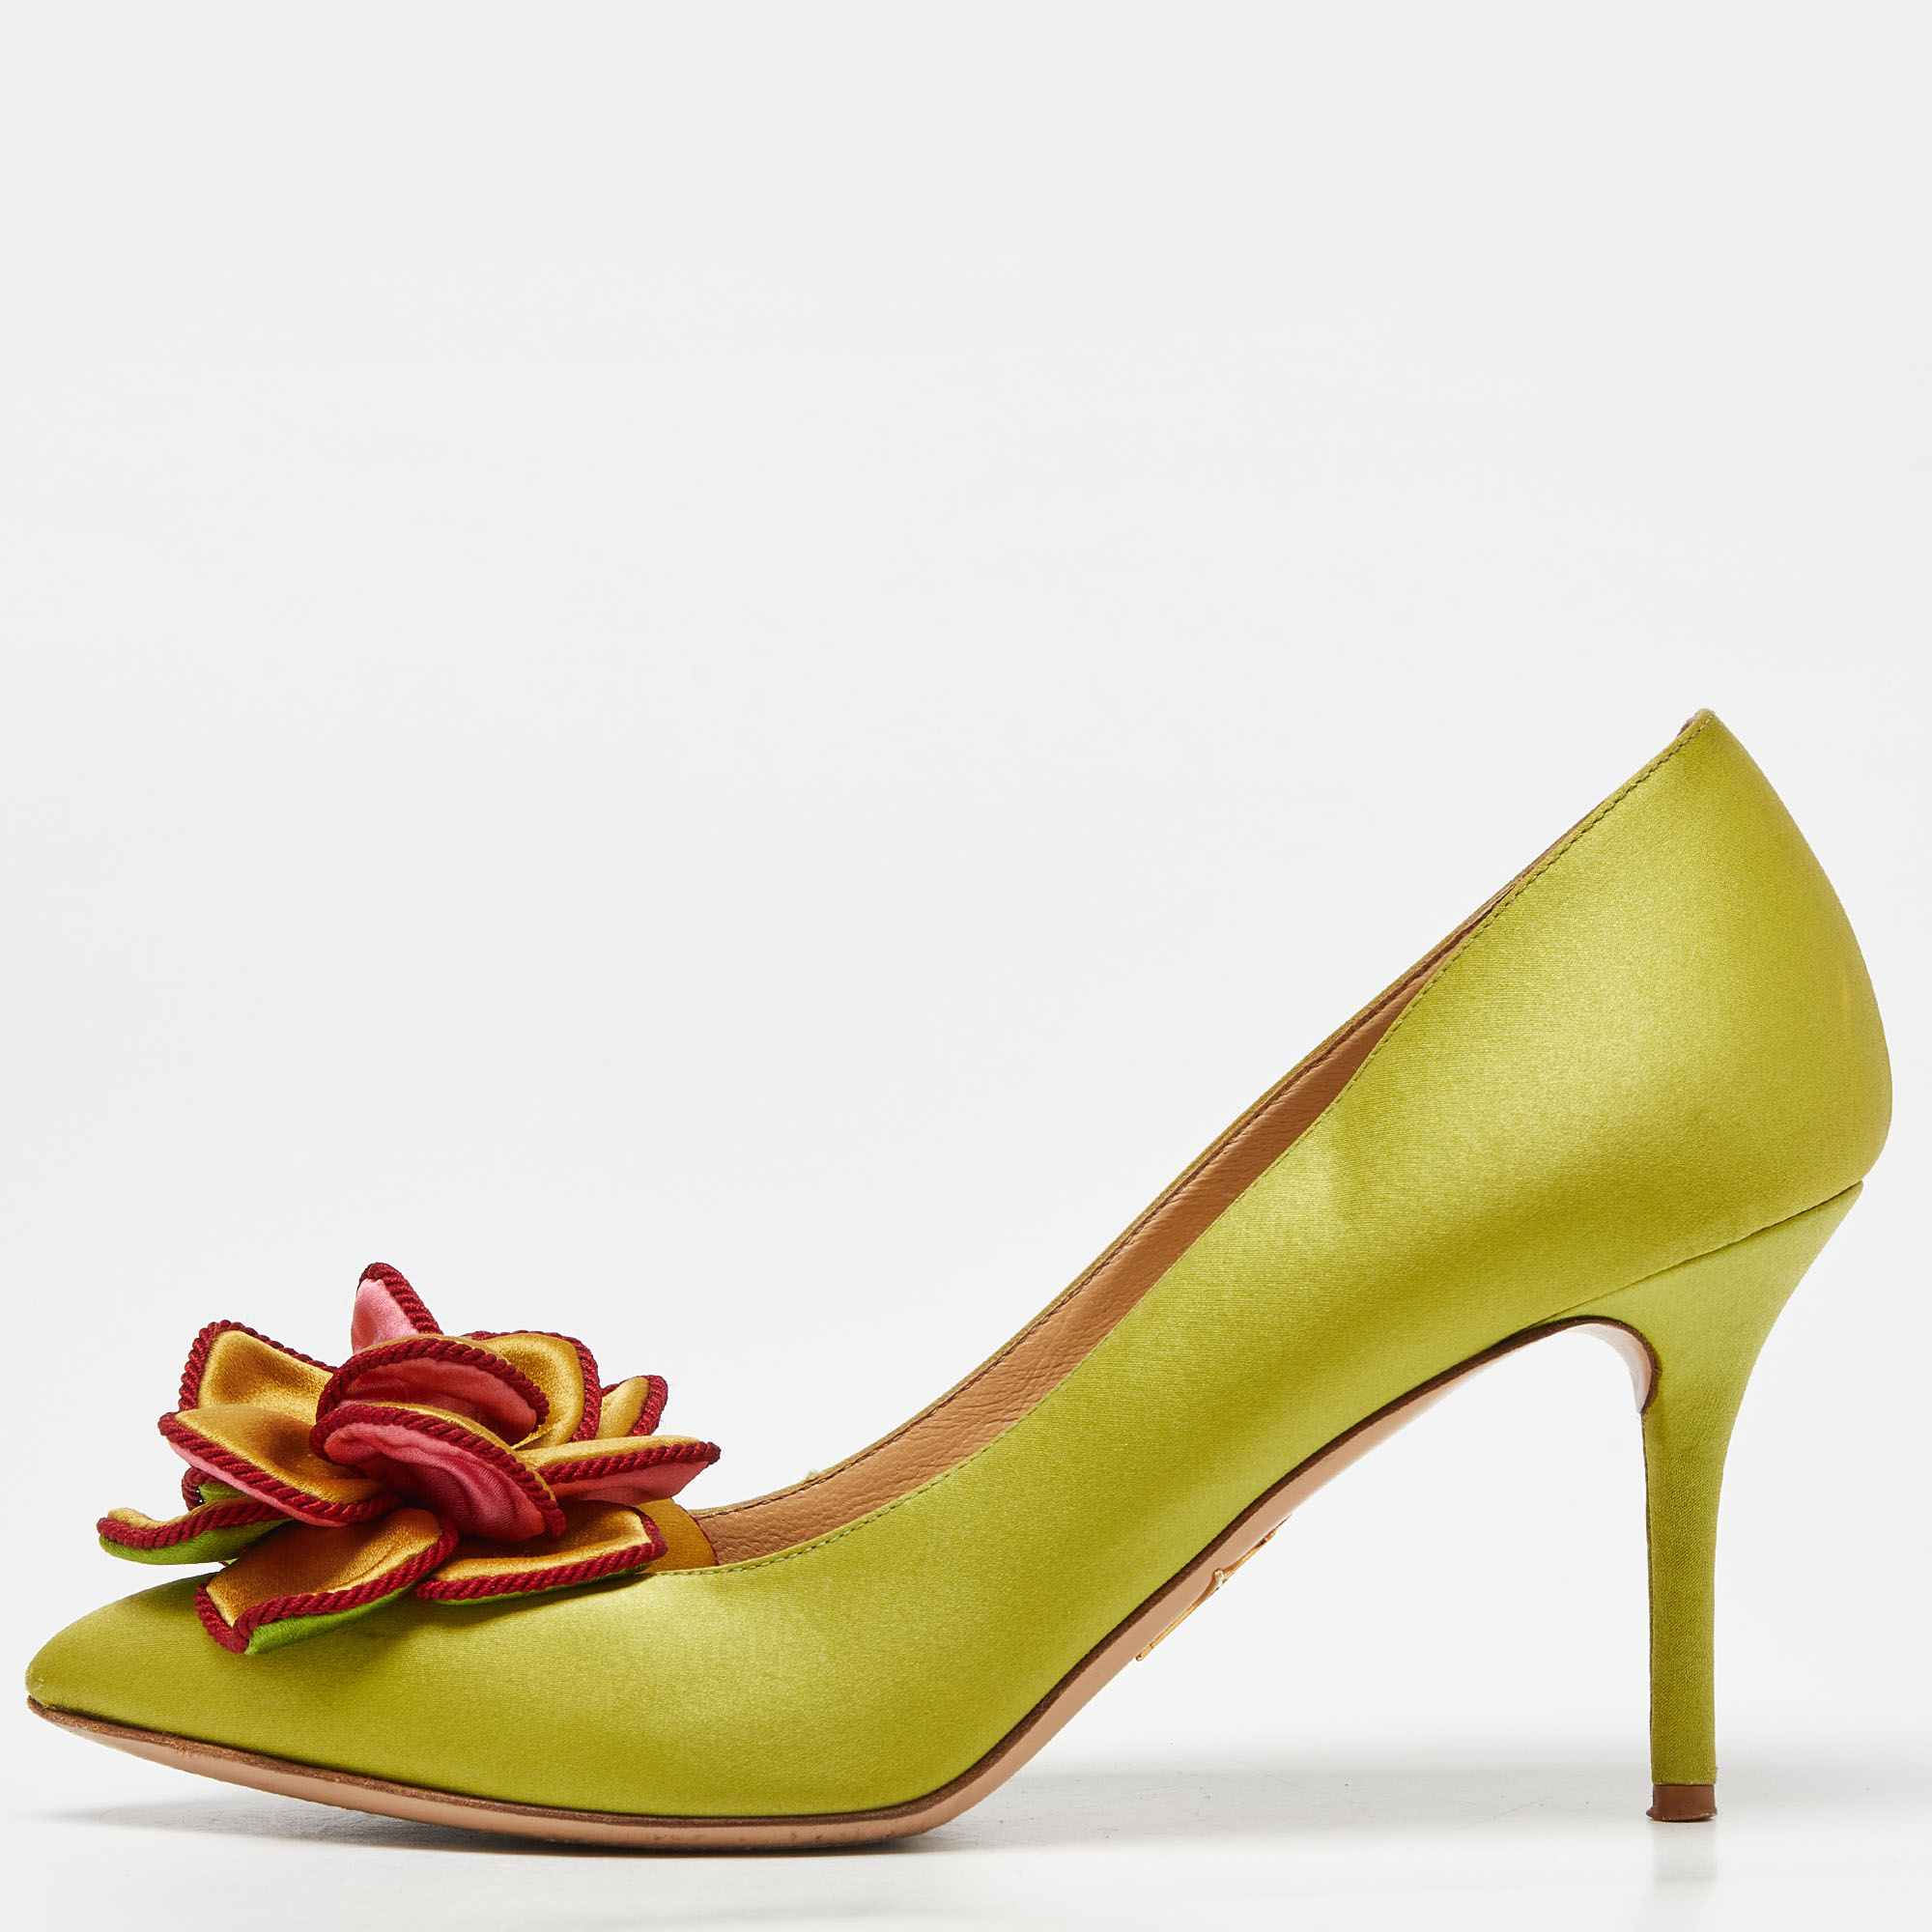 Charlotte olympia green satin flower detail pointed toe pumps size 37